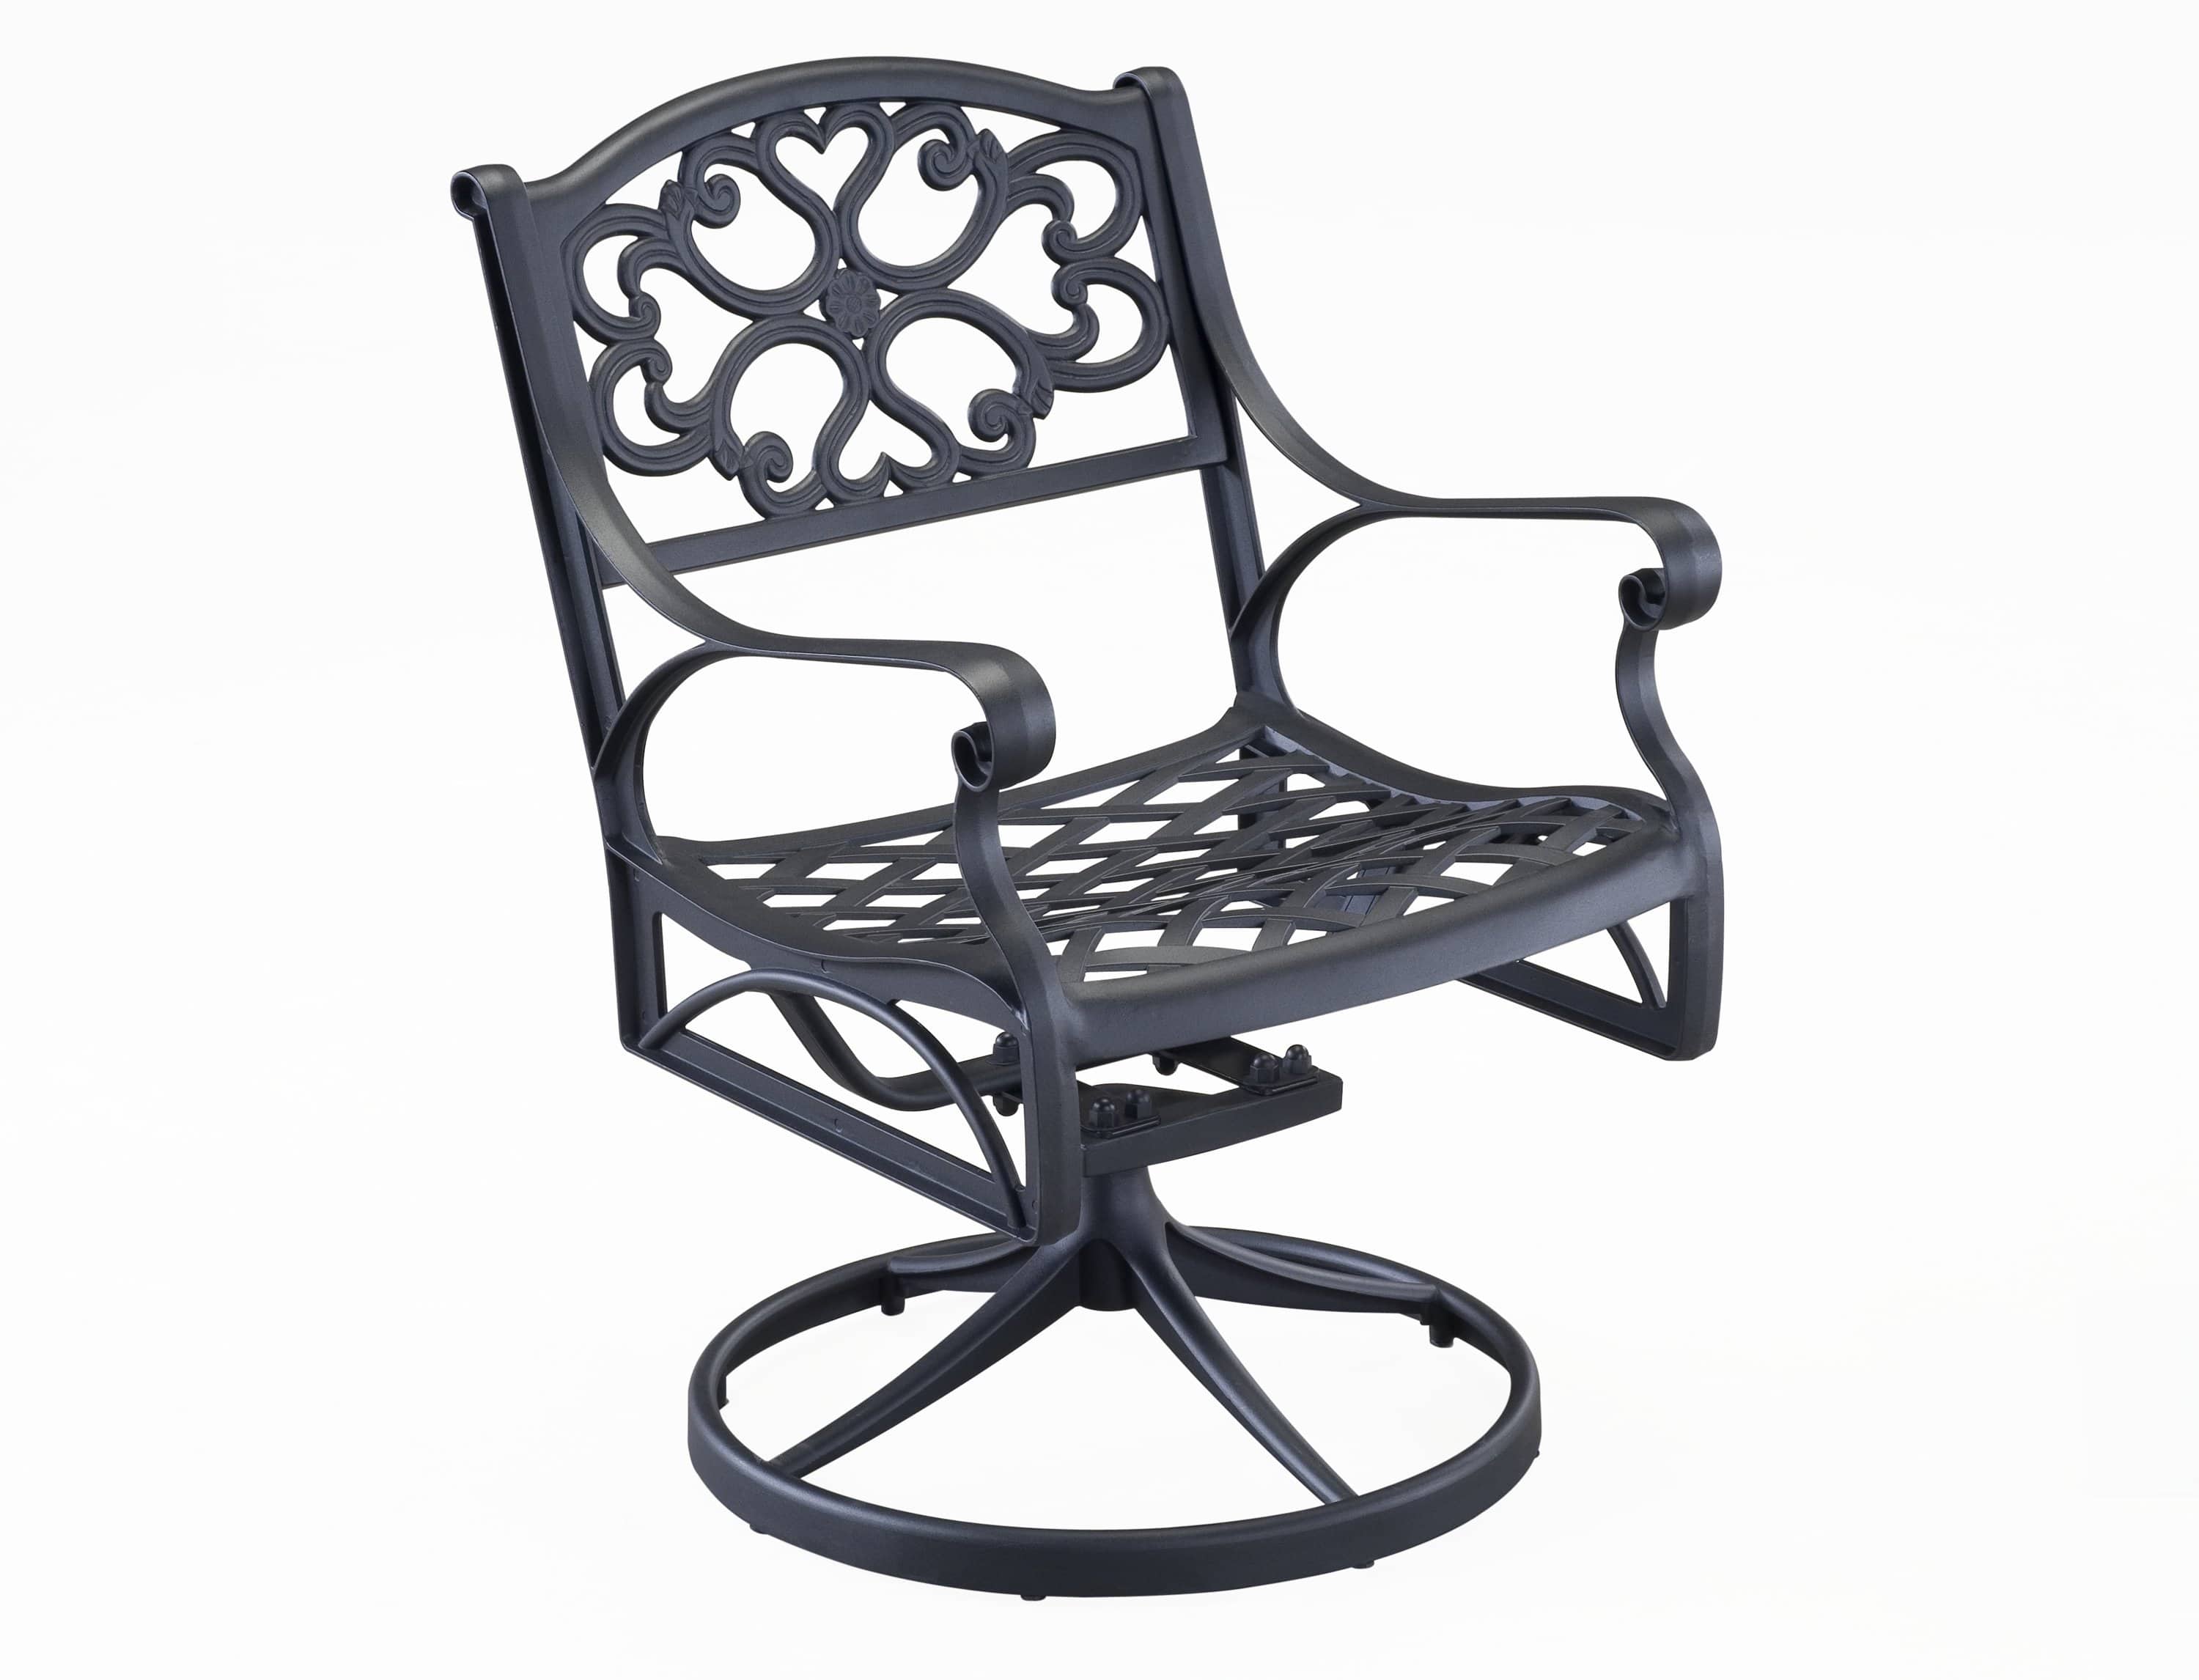 Homestyles Outdoor Chairs Sanibel Outdoor Swivel Rocking Chair by Homestyles